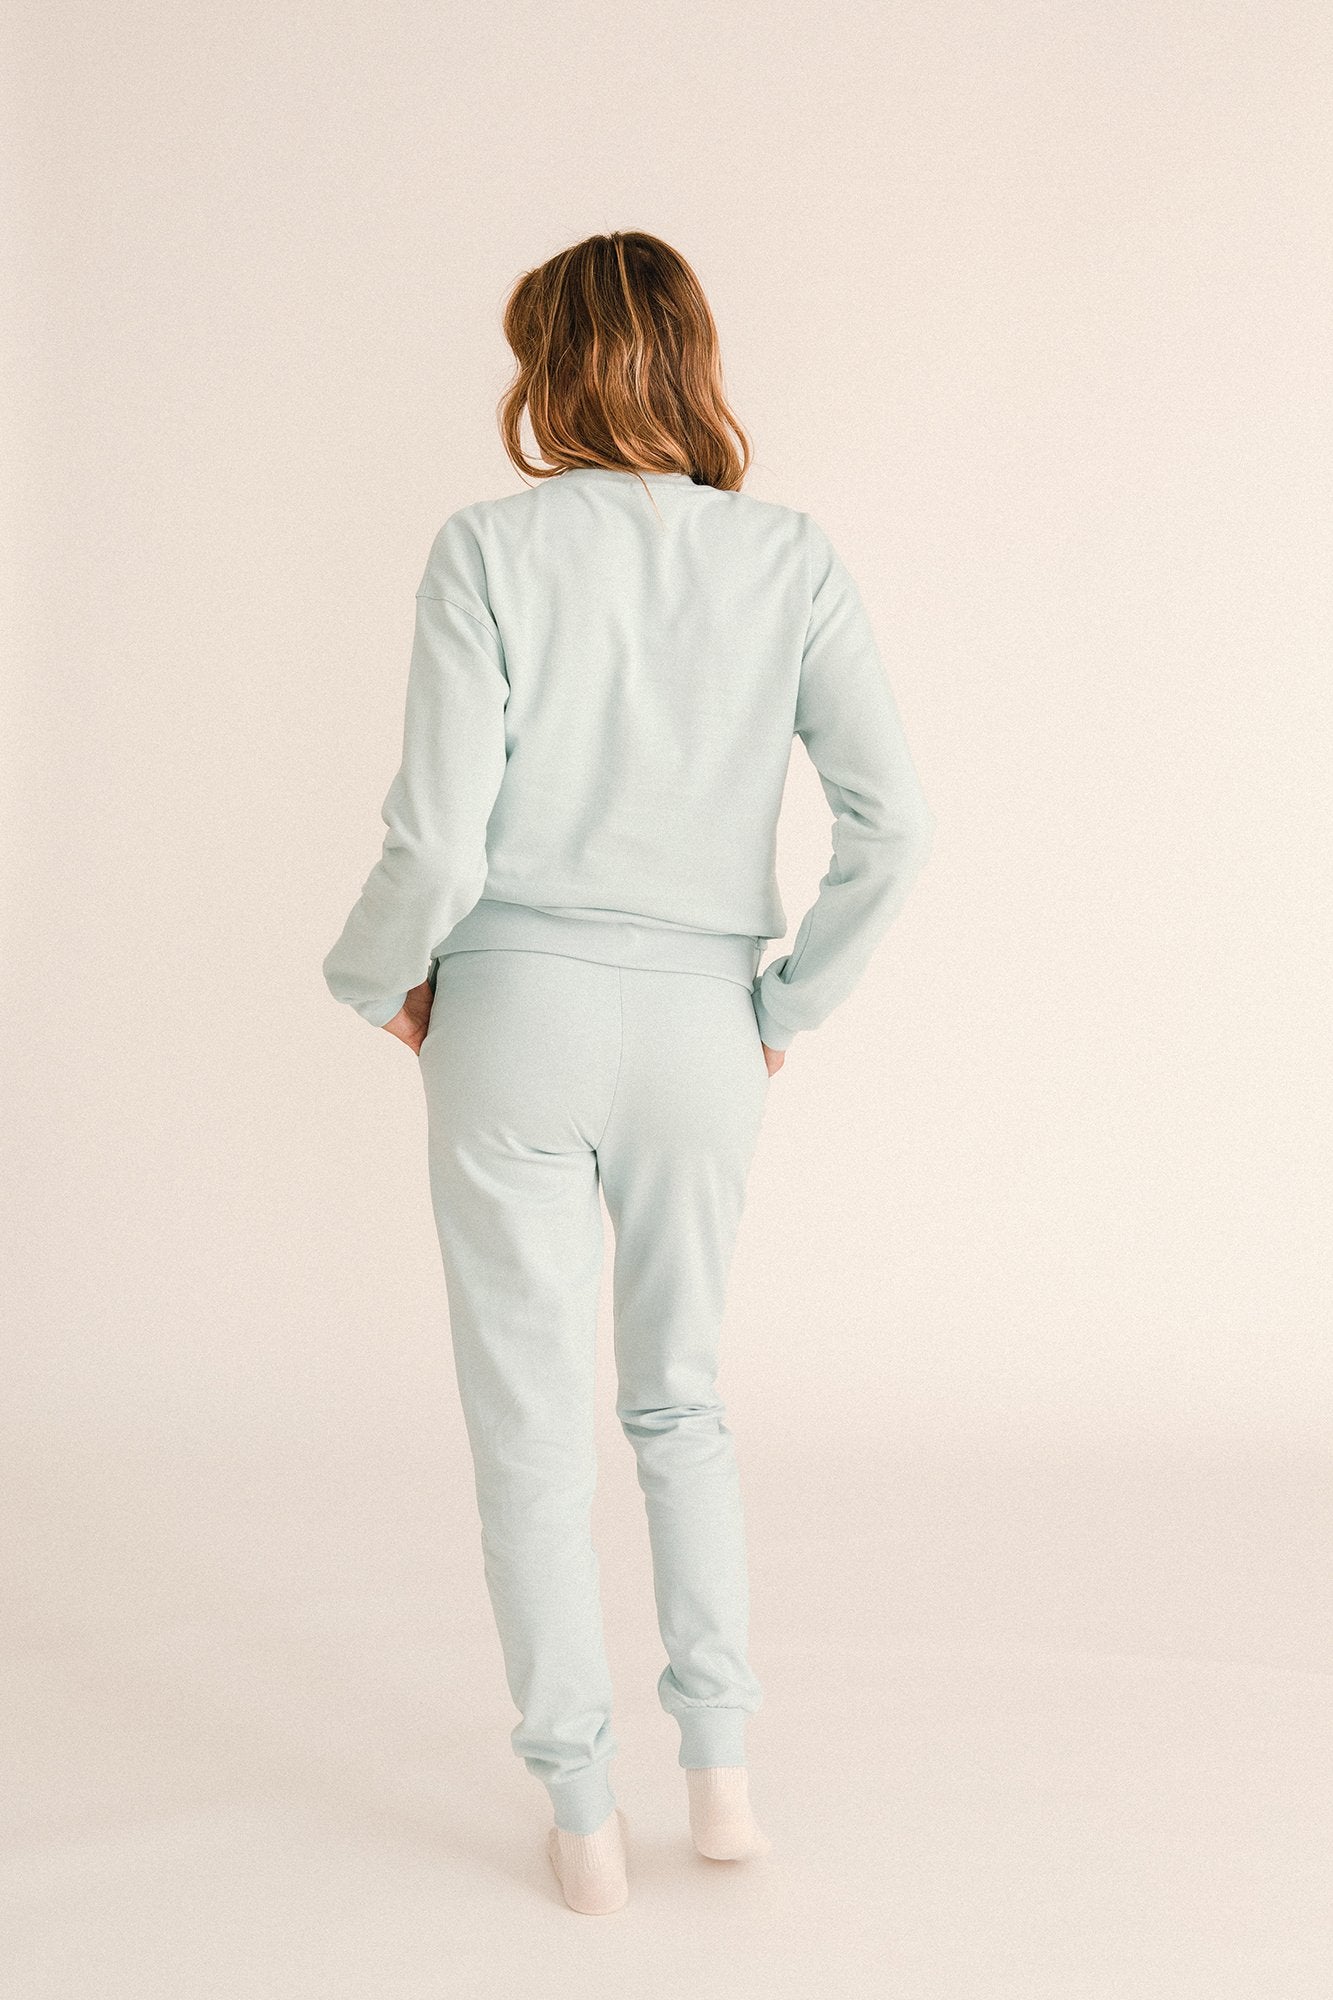 The Baby Blue Joggers